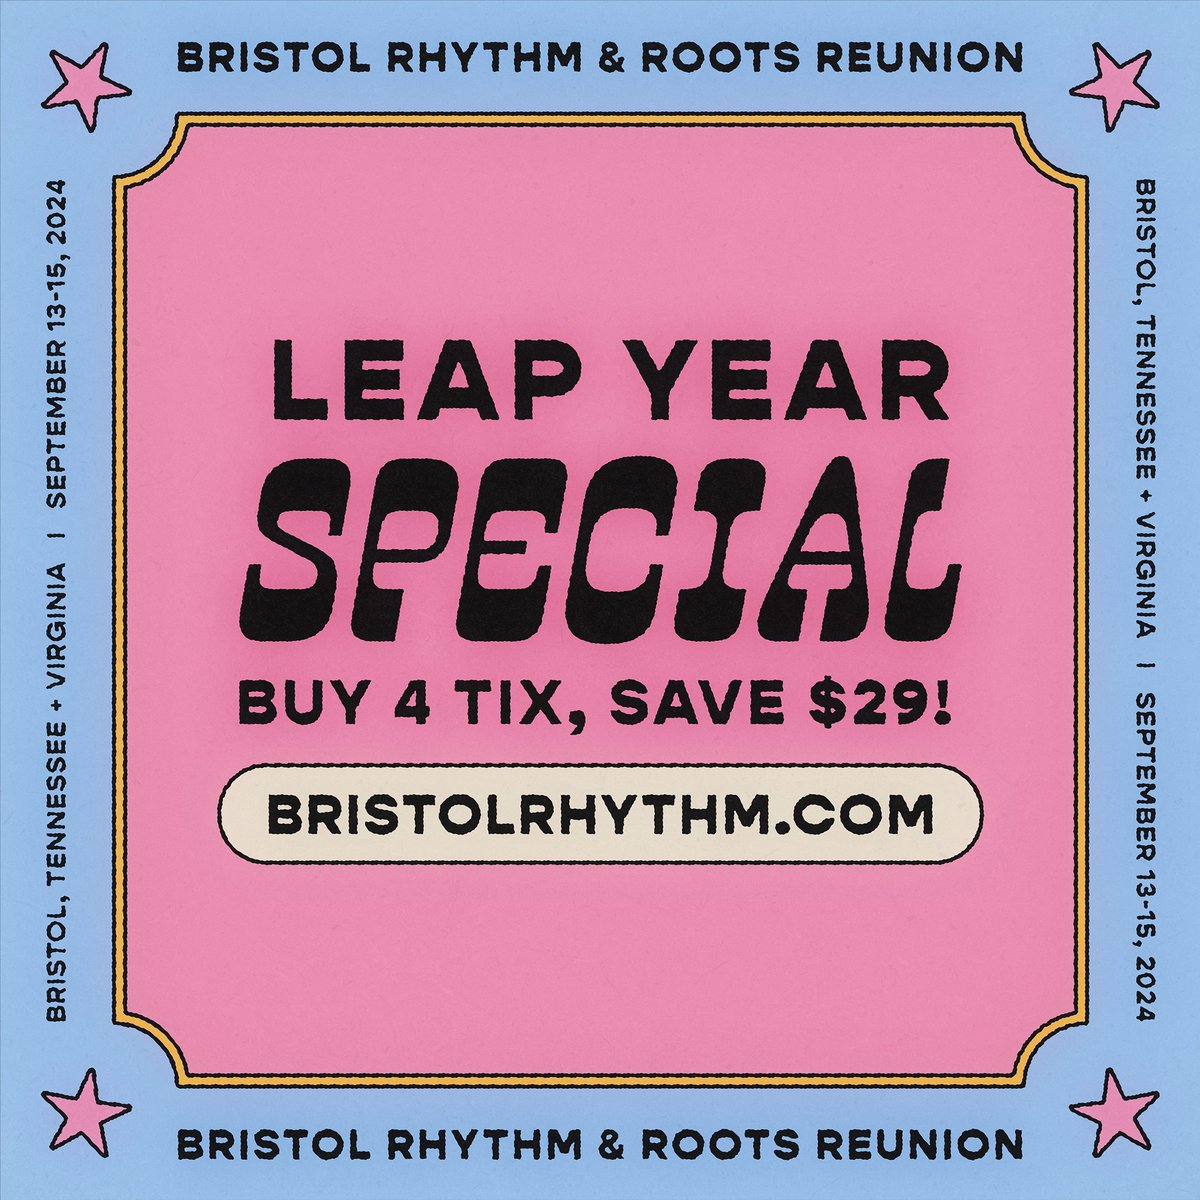 🚨🛒LEAP YEAR SPECIAL!!! 🎟️Purchase four (4) weekend passes and get $29 off your order! Offer valid today only and ends at midnight. You must add the “Leap Year Special” ticket type to your cart to get the discount. Head to BristolRhythm.com to secure your tickets! 🤠